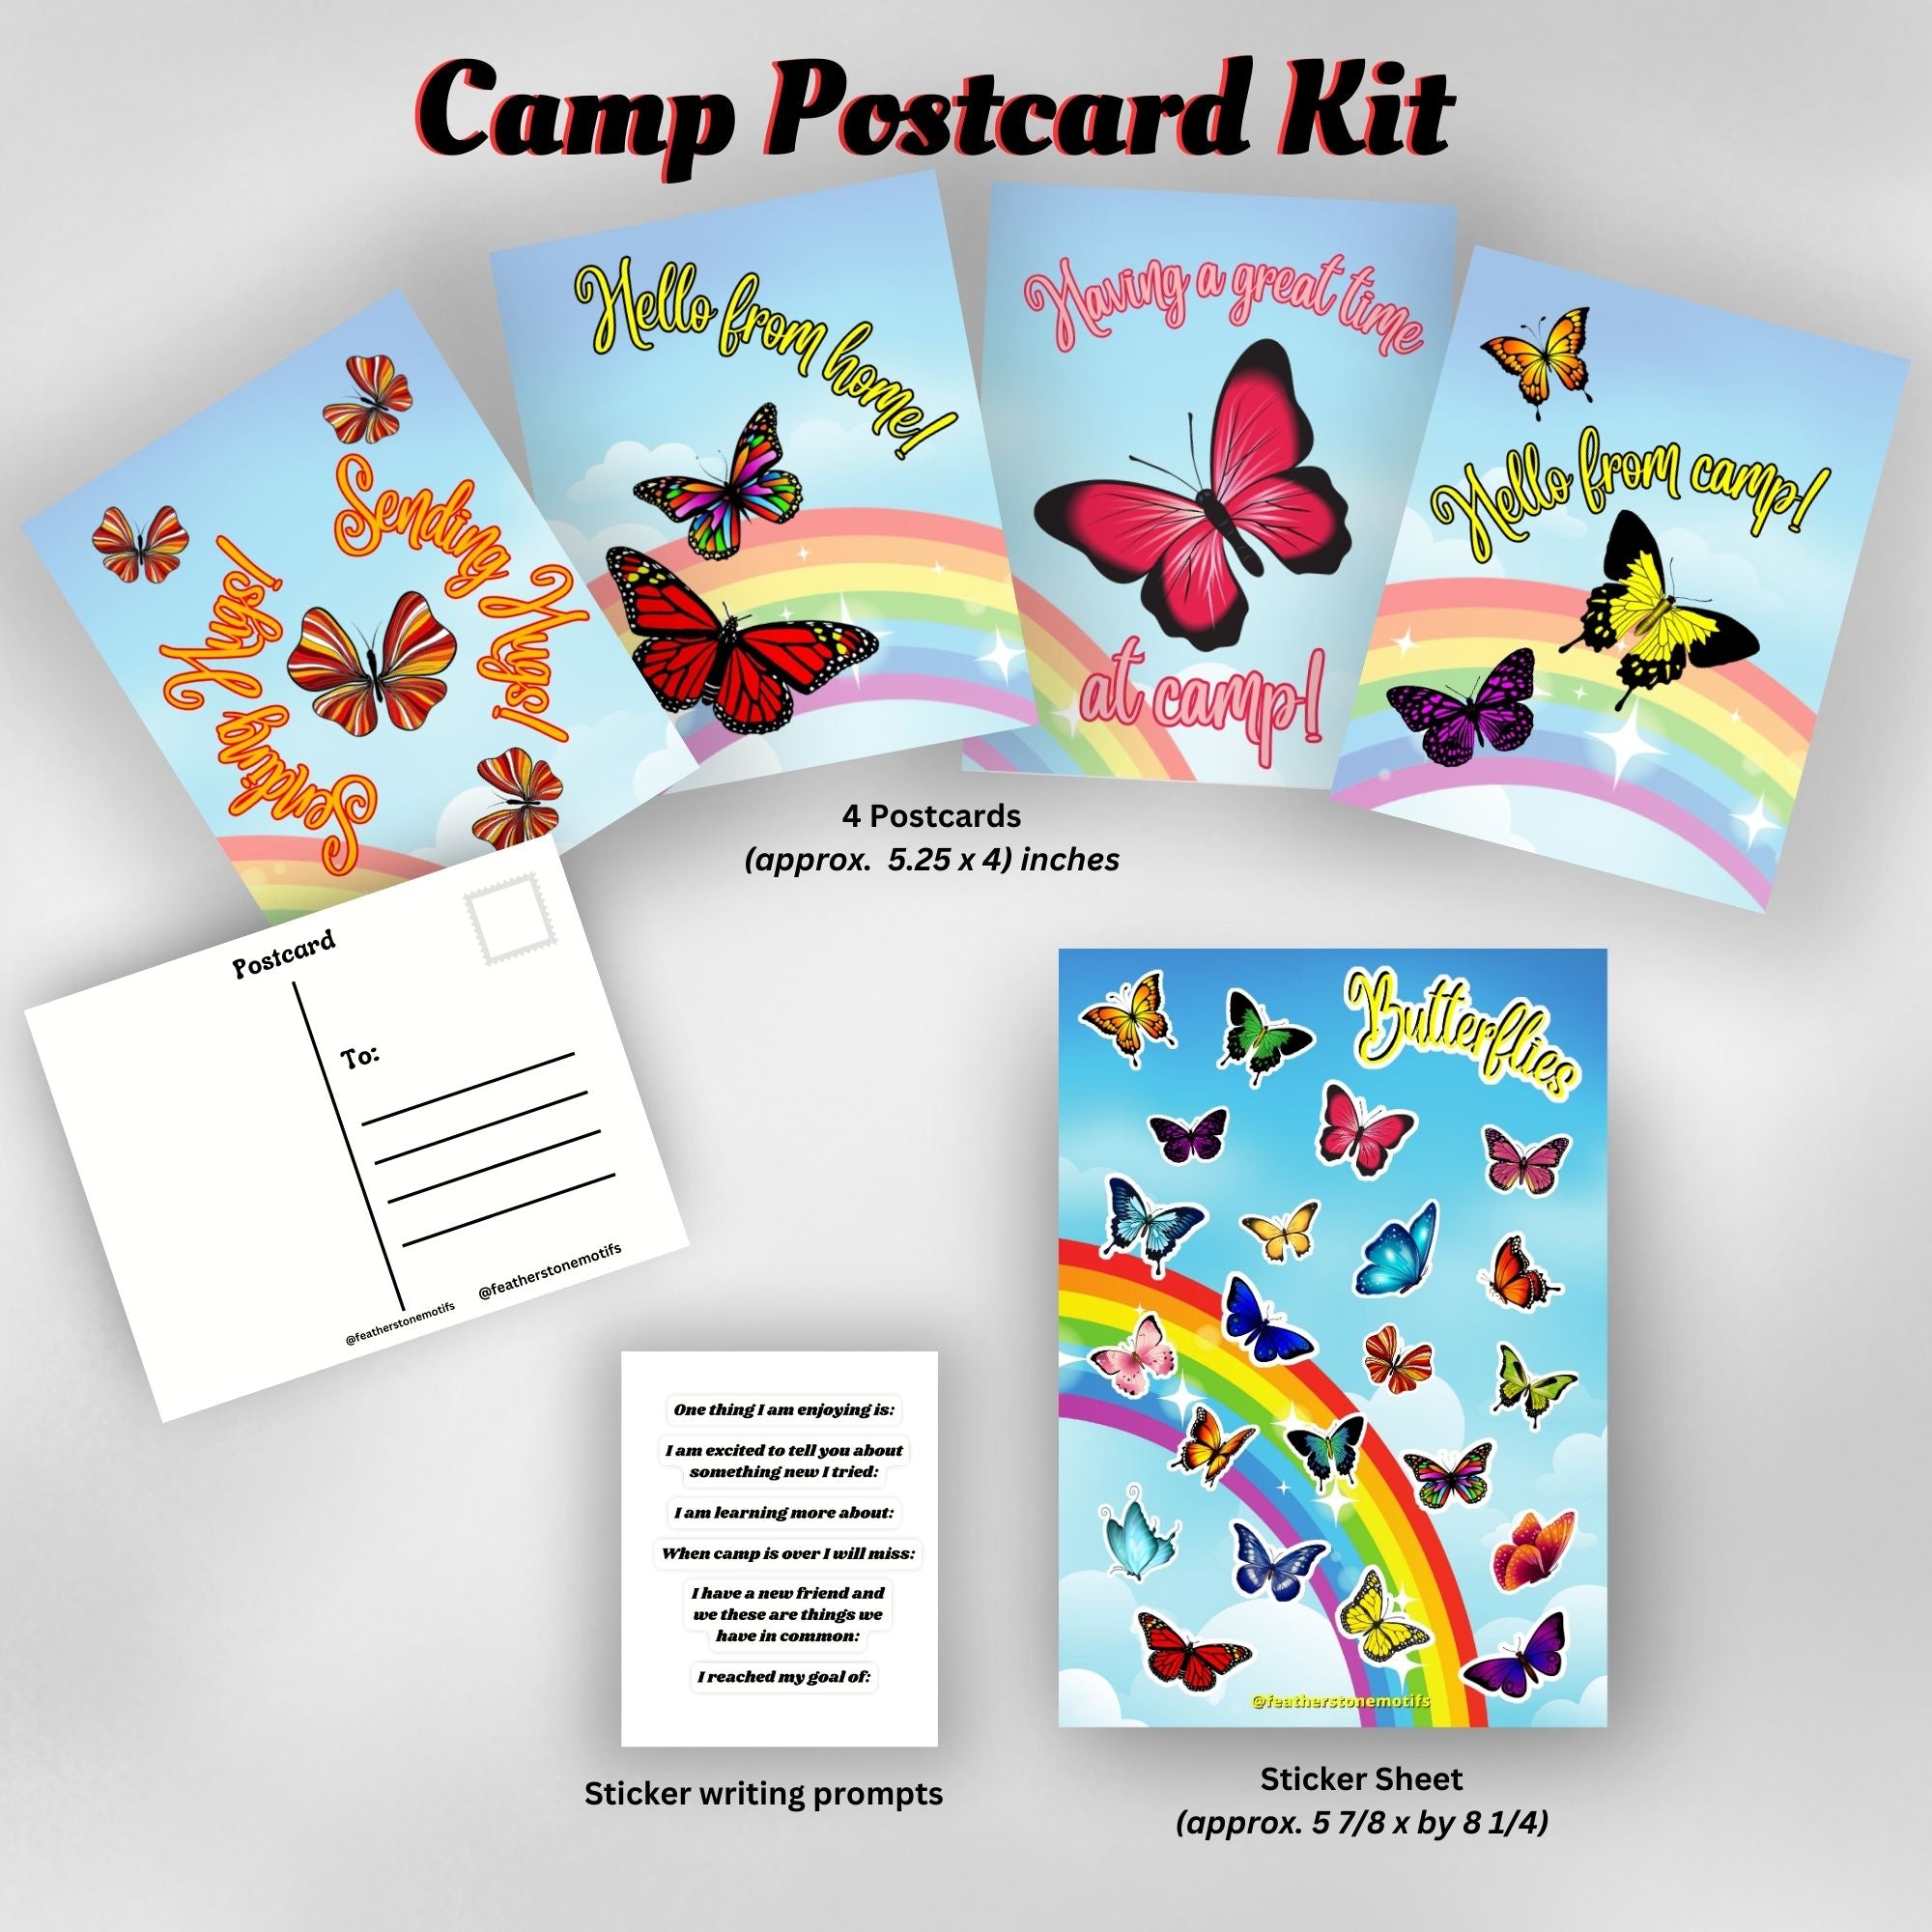 This image shows the Butterfly themed Camp Postcard Kit with descriptions and dimensions for each item.